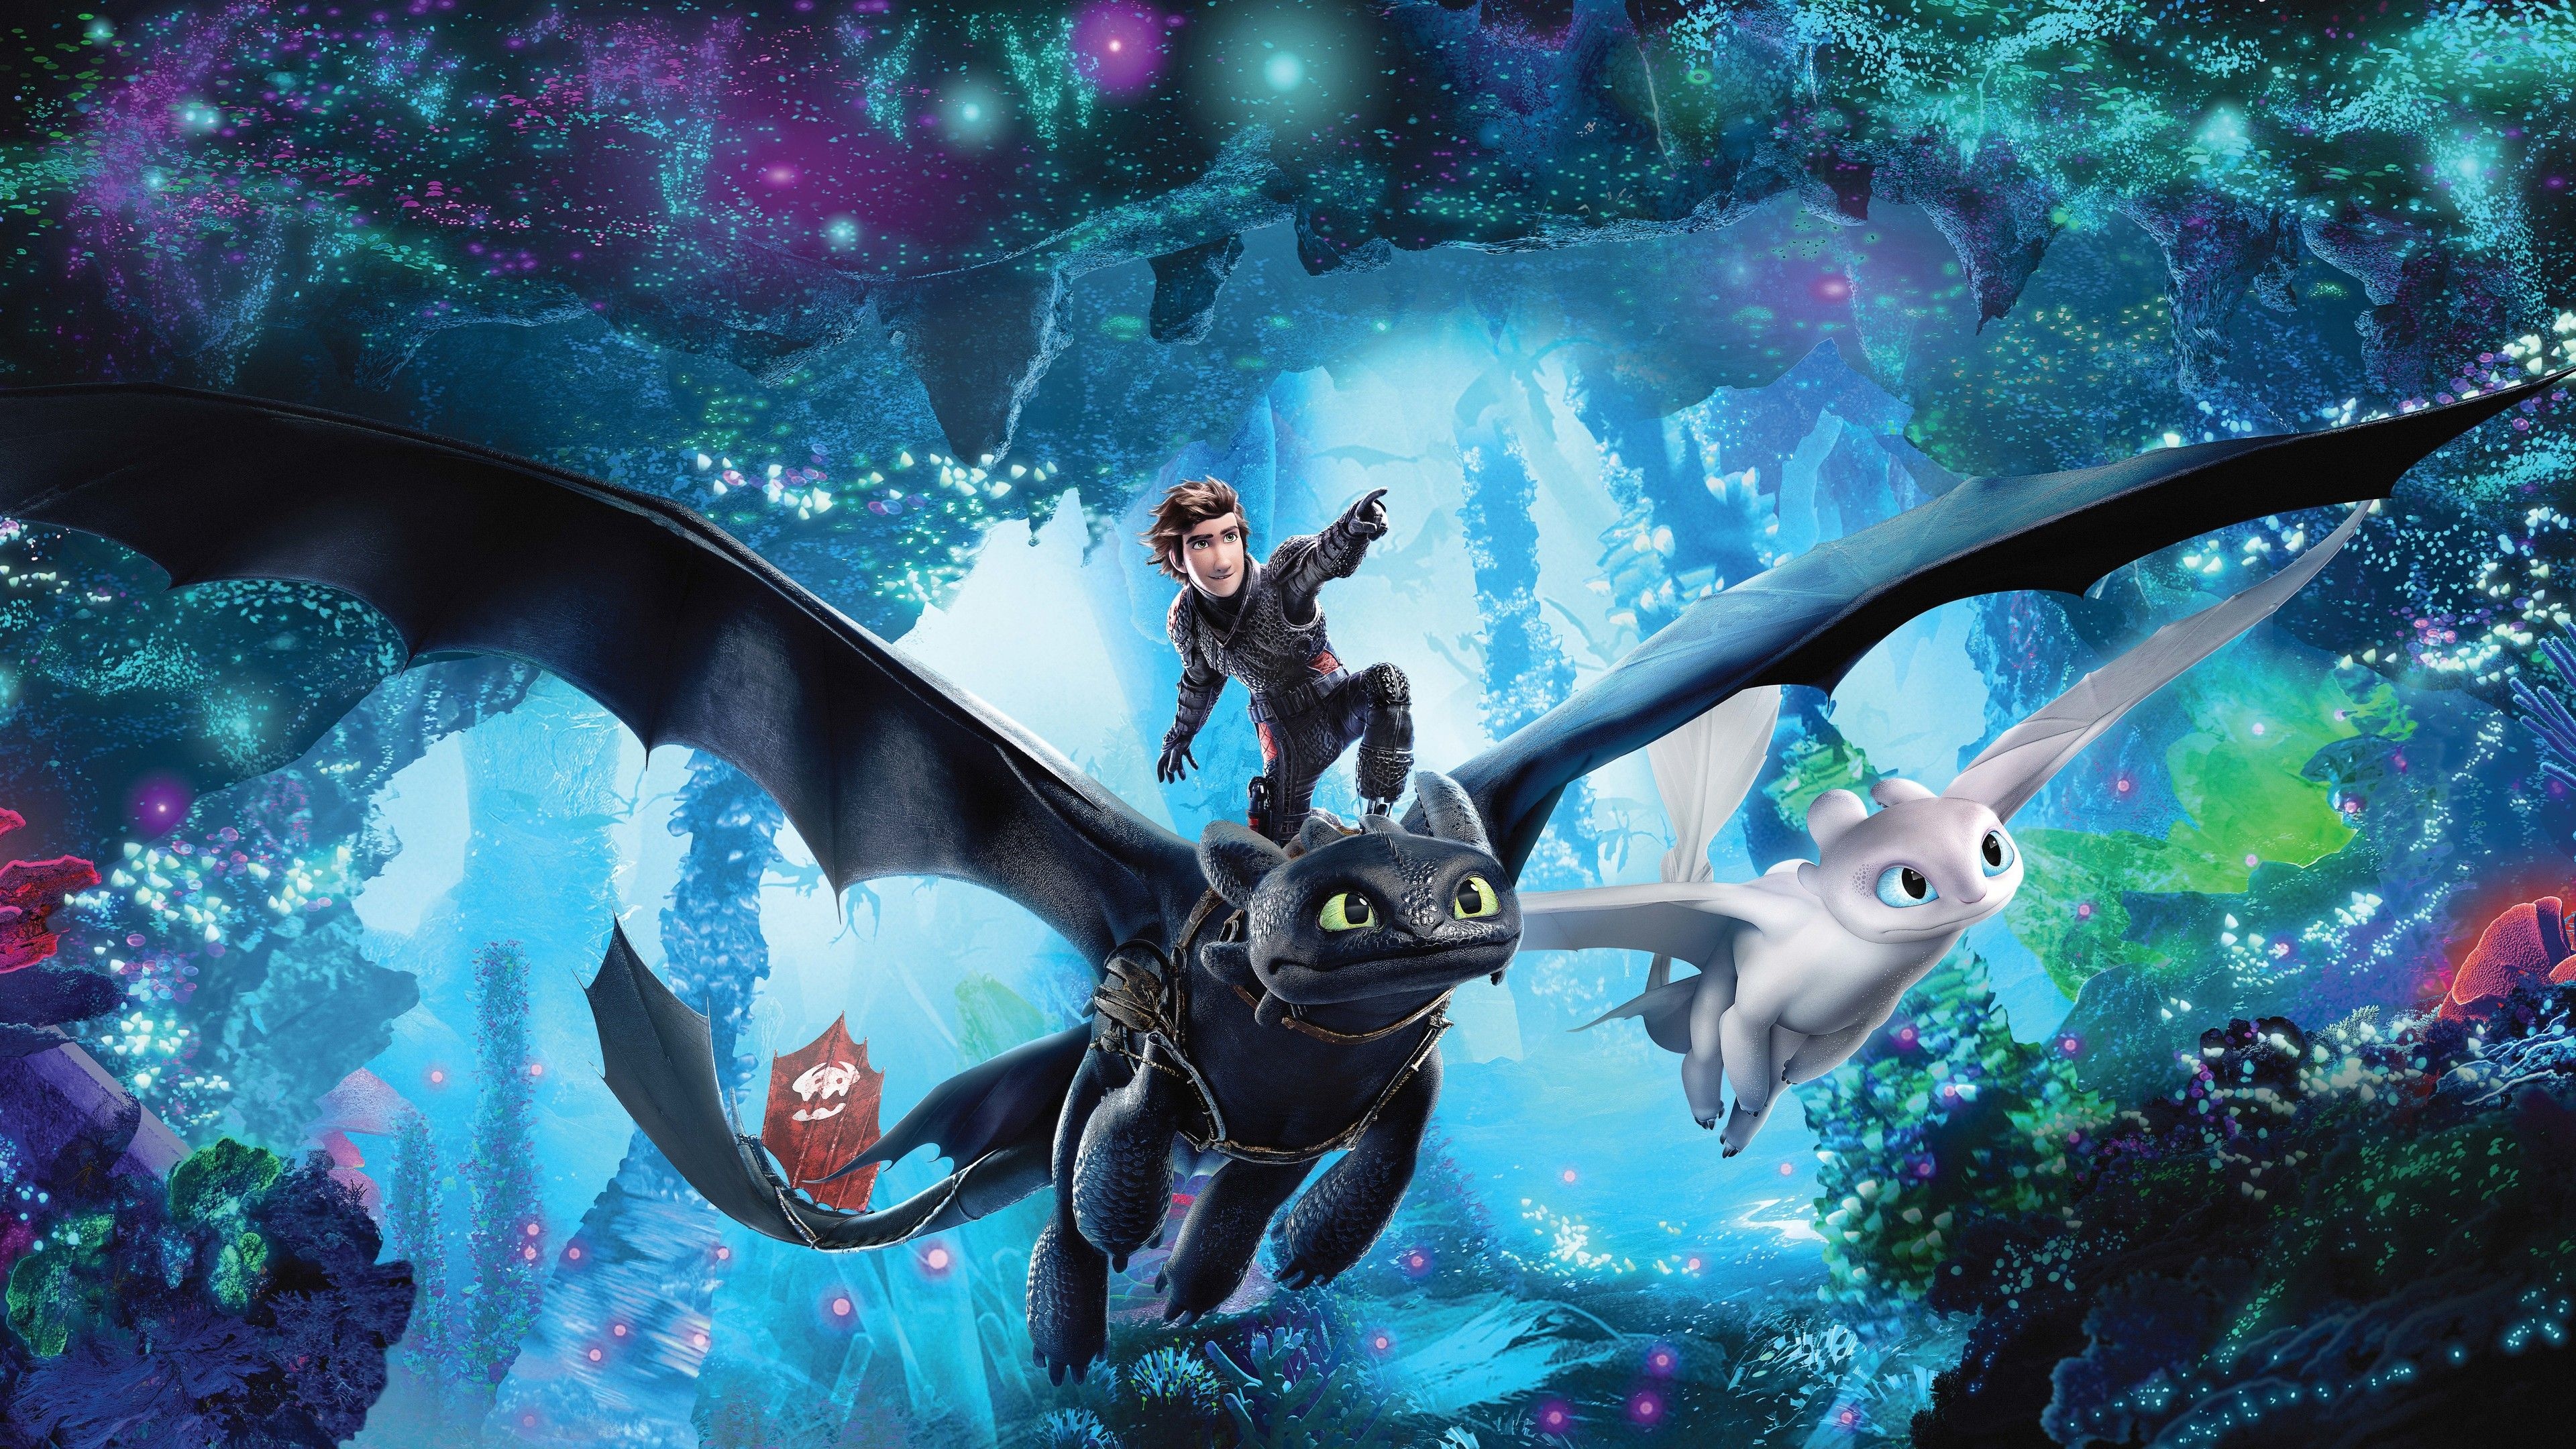 How to Train Your Dragon: The Hidden World, Posters, Wallpapers, 3840x2160 4K Desktop